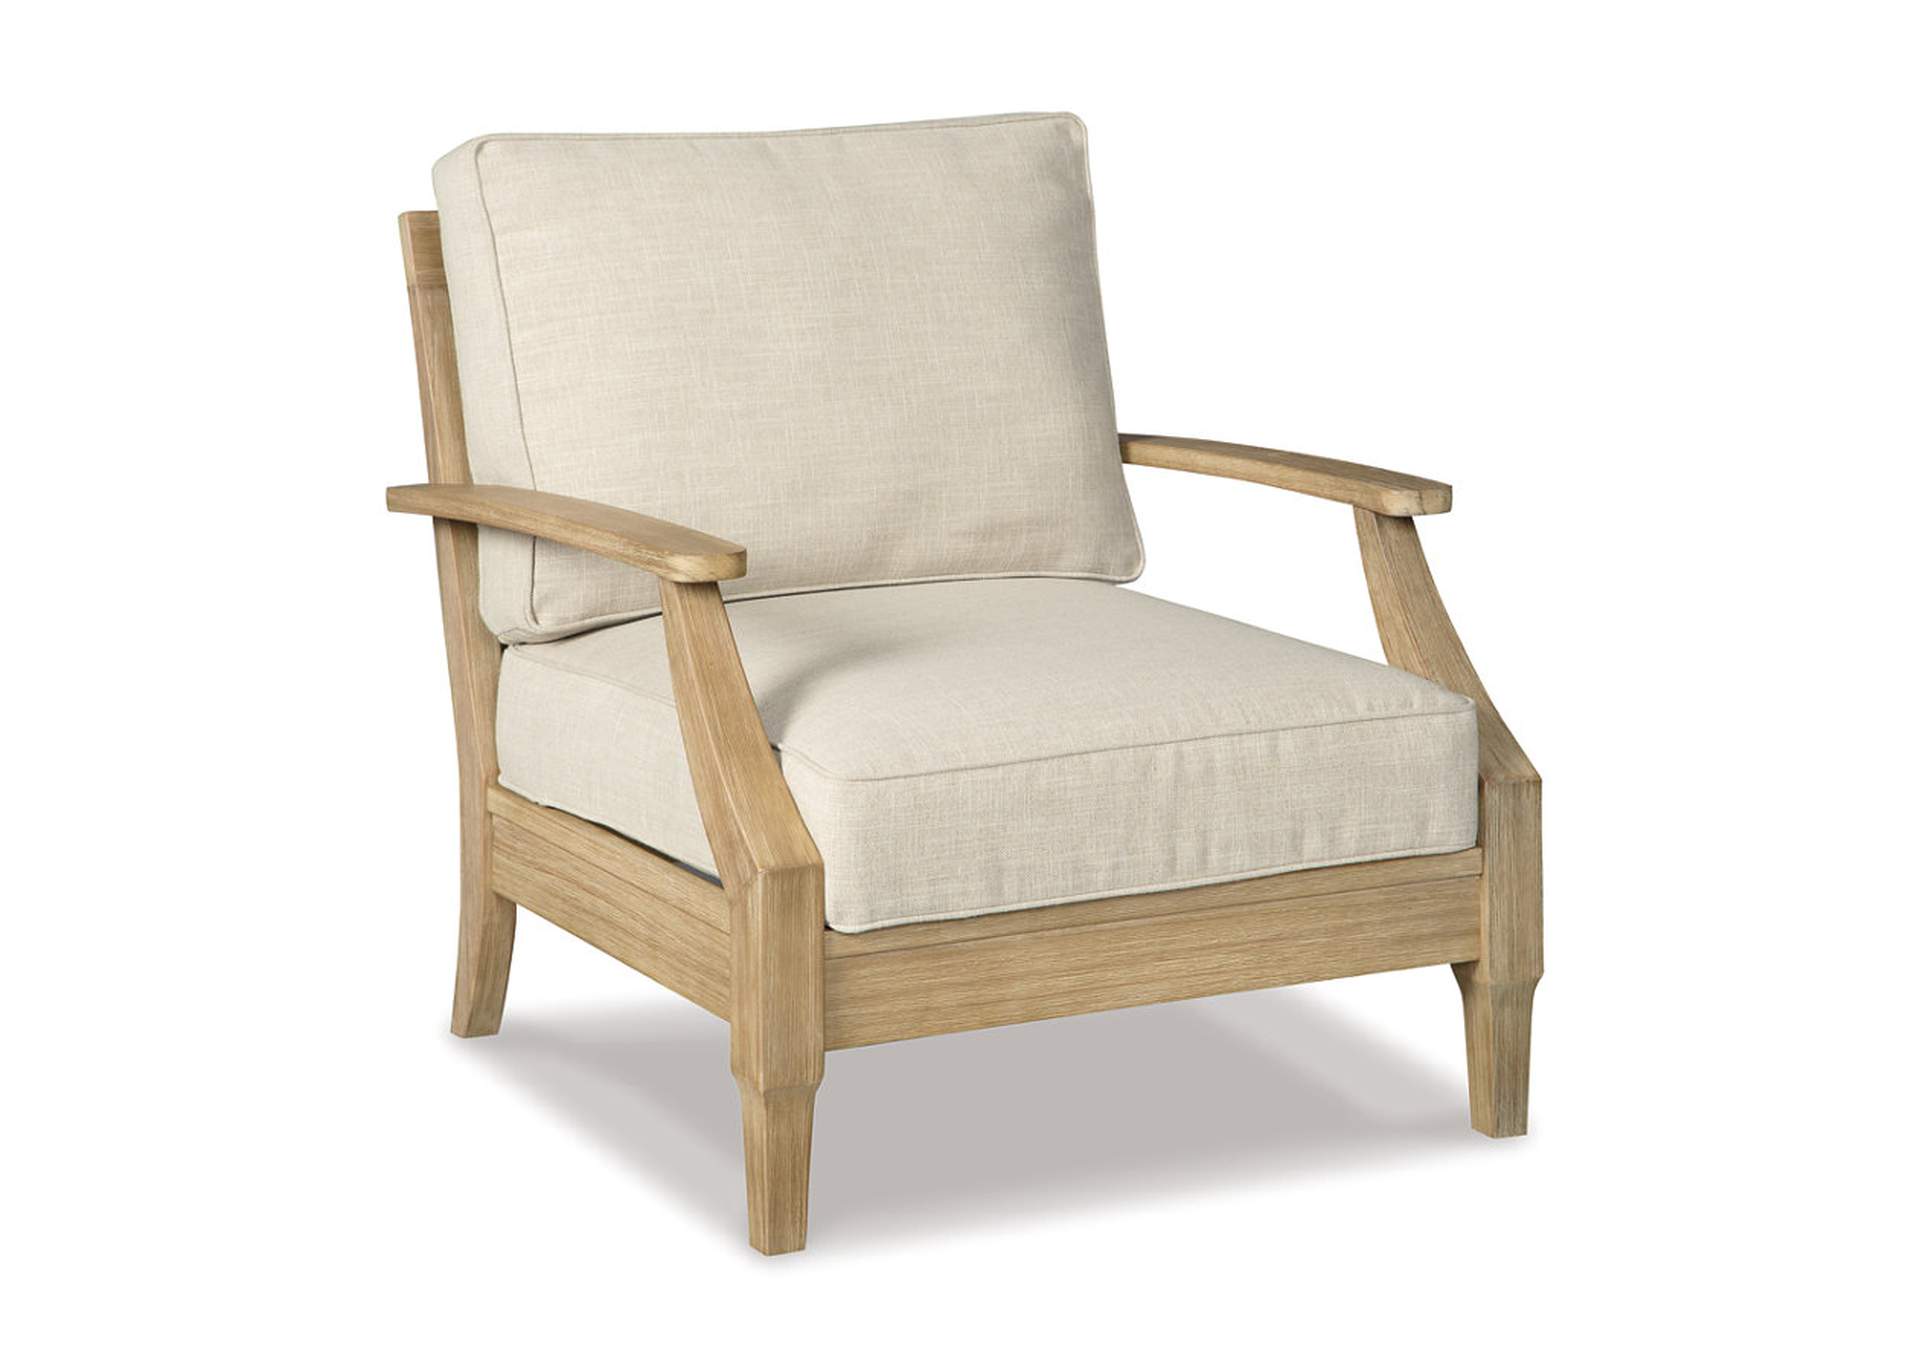 Clare View Lounge Chair with Cushion